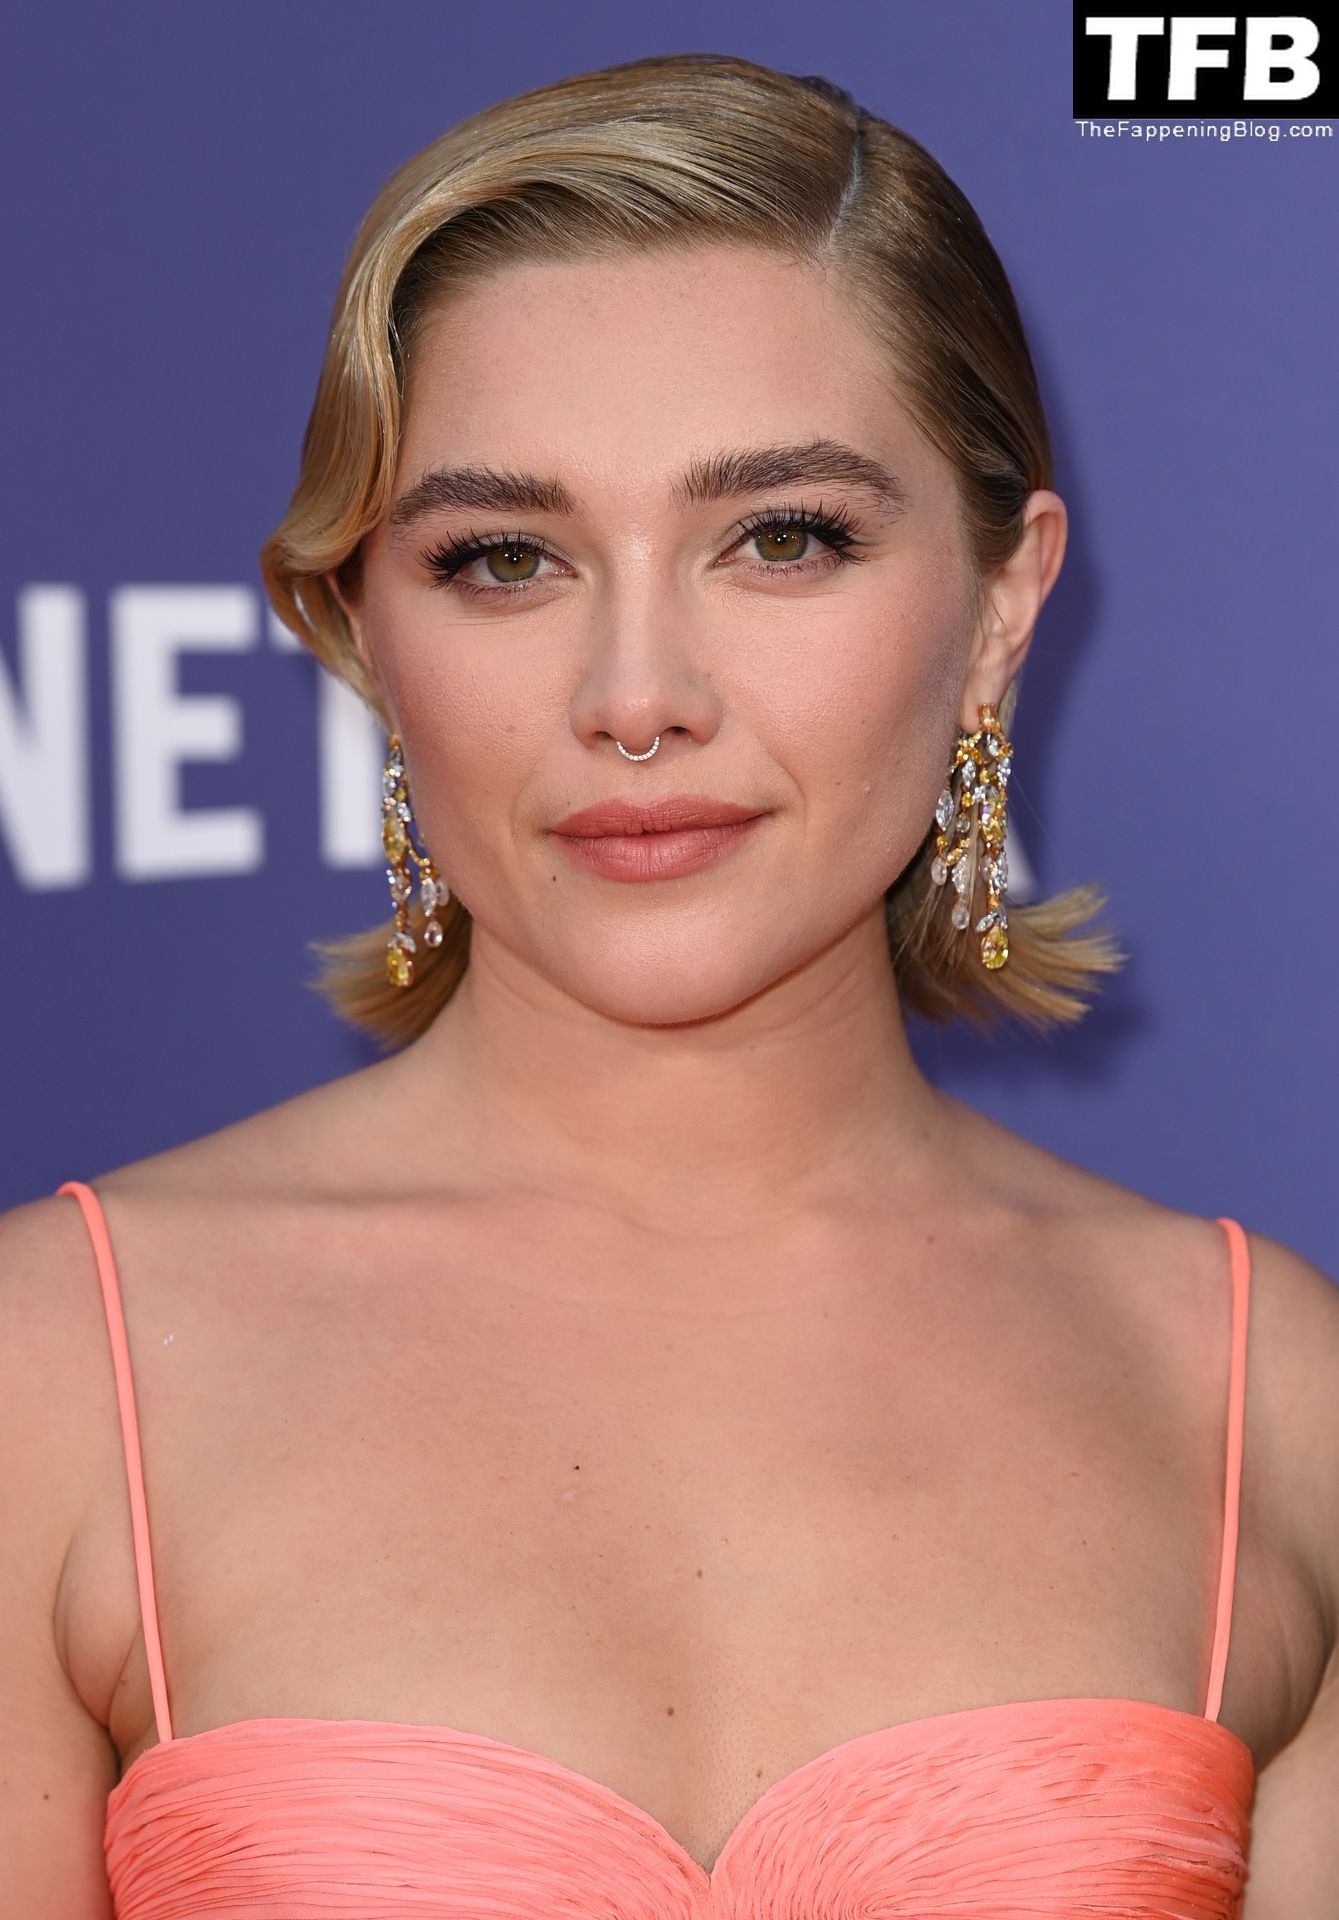 Florence-Pugh-Sexy-The-Fappening-Blog-44-1.jpg